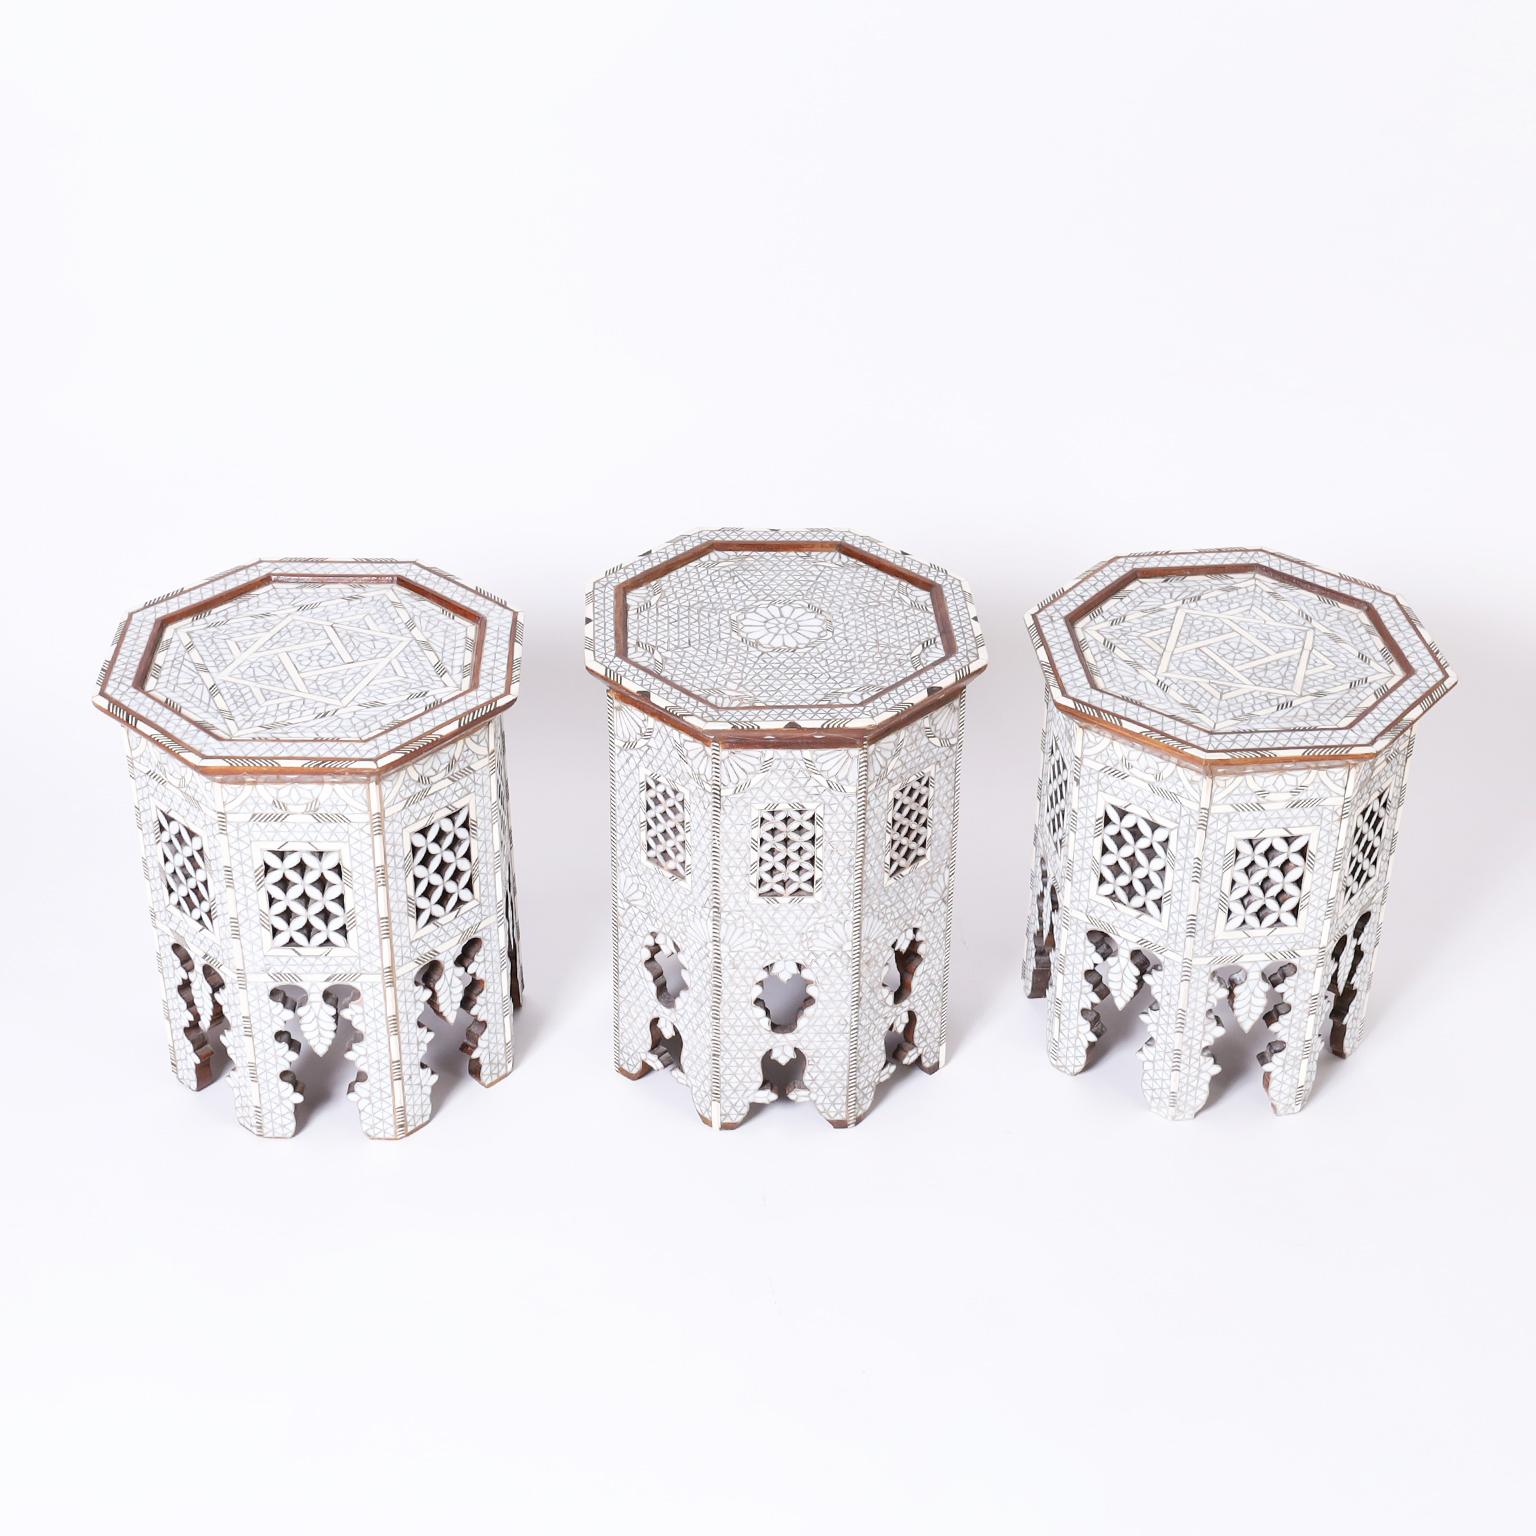 Striking set of three Moroccan stands with octagon forms crafted in walnut featuring elaborate mother of pearl geometric and floral mosaics highlighted with bone and ebony, all on classic moorish arched designs. Priced Individually.

The pair: H: 18